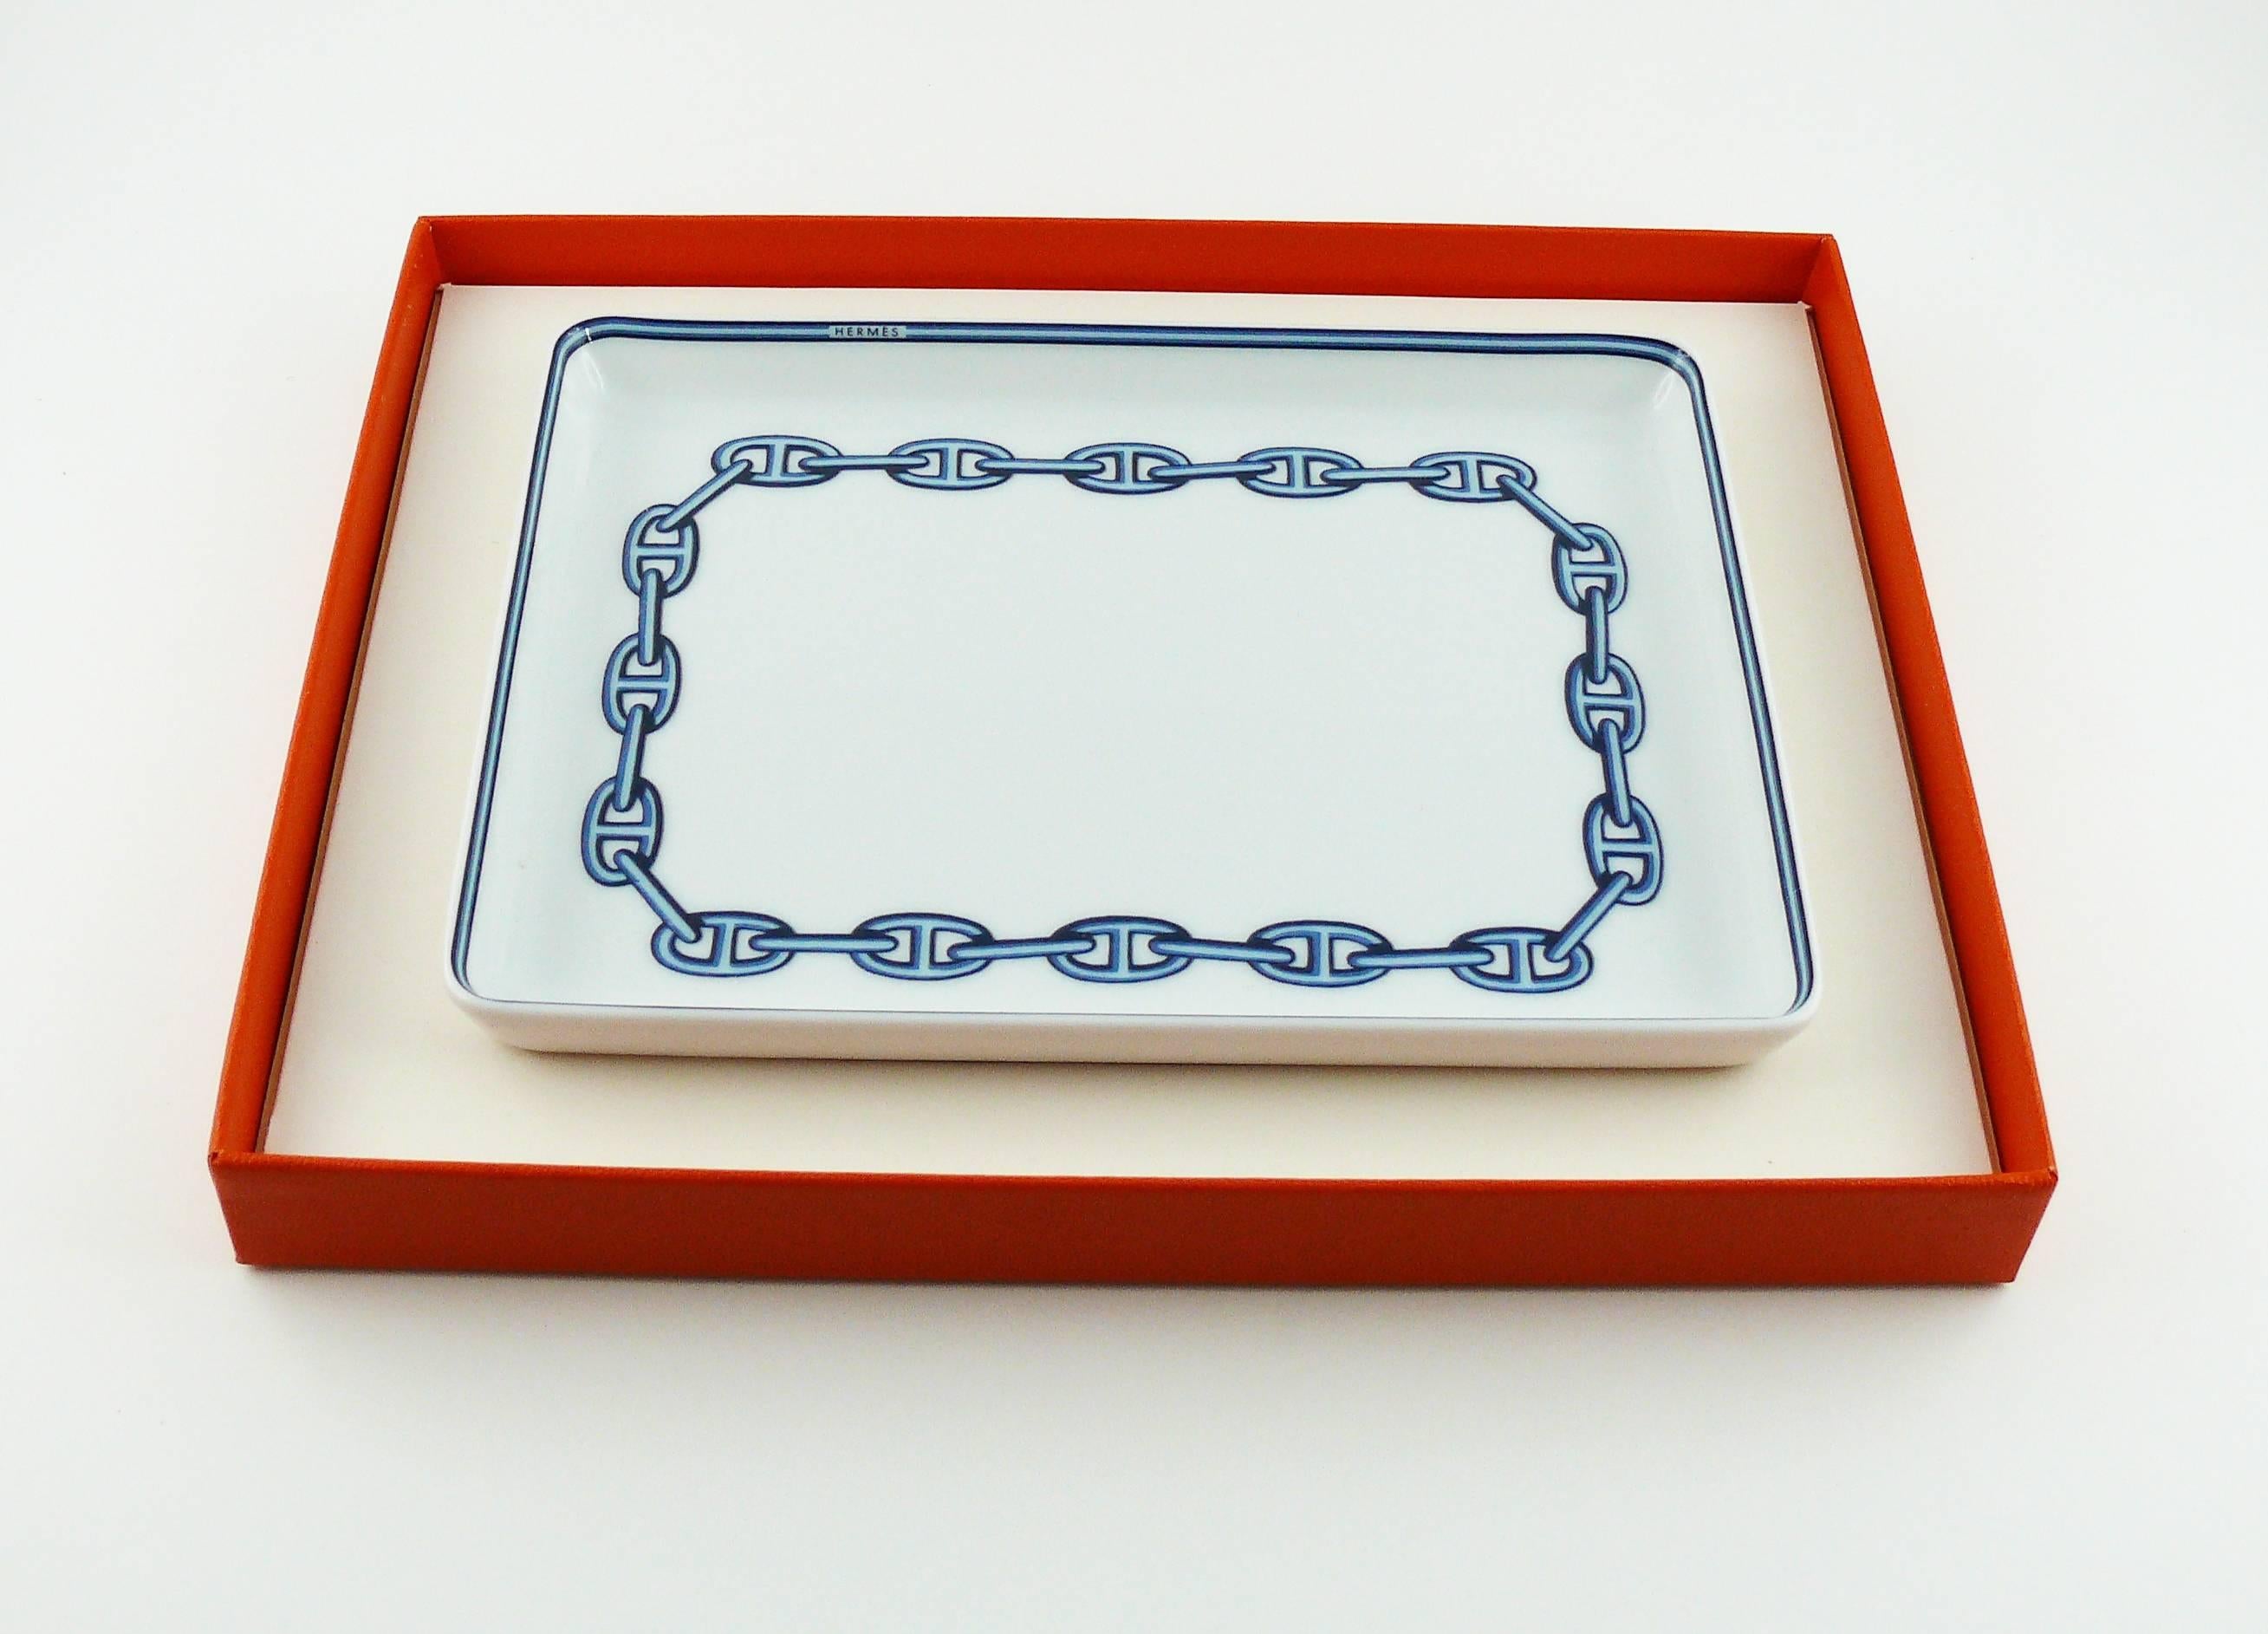 HERMES Chaine d'Ancre rectangular plate / pin tray.

White porcelaine with blue design.

Marked HERMES Porcelaine Paris.

Comes with original box.

Note
As a buyer, you are fully responsible for customs duties, other local taxes and any